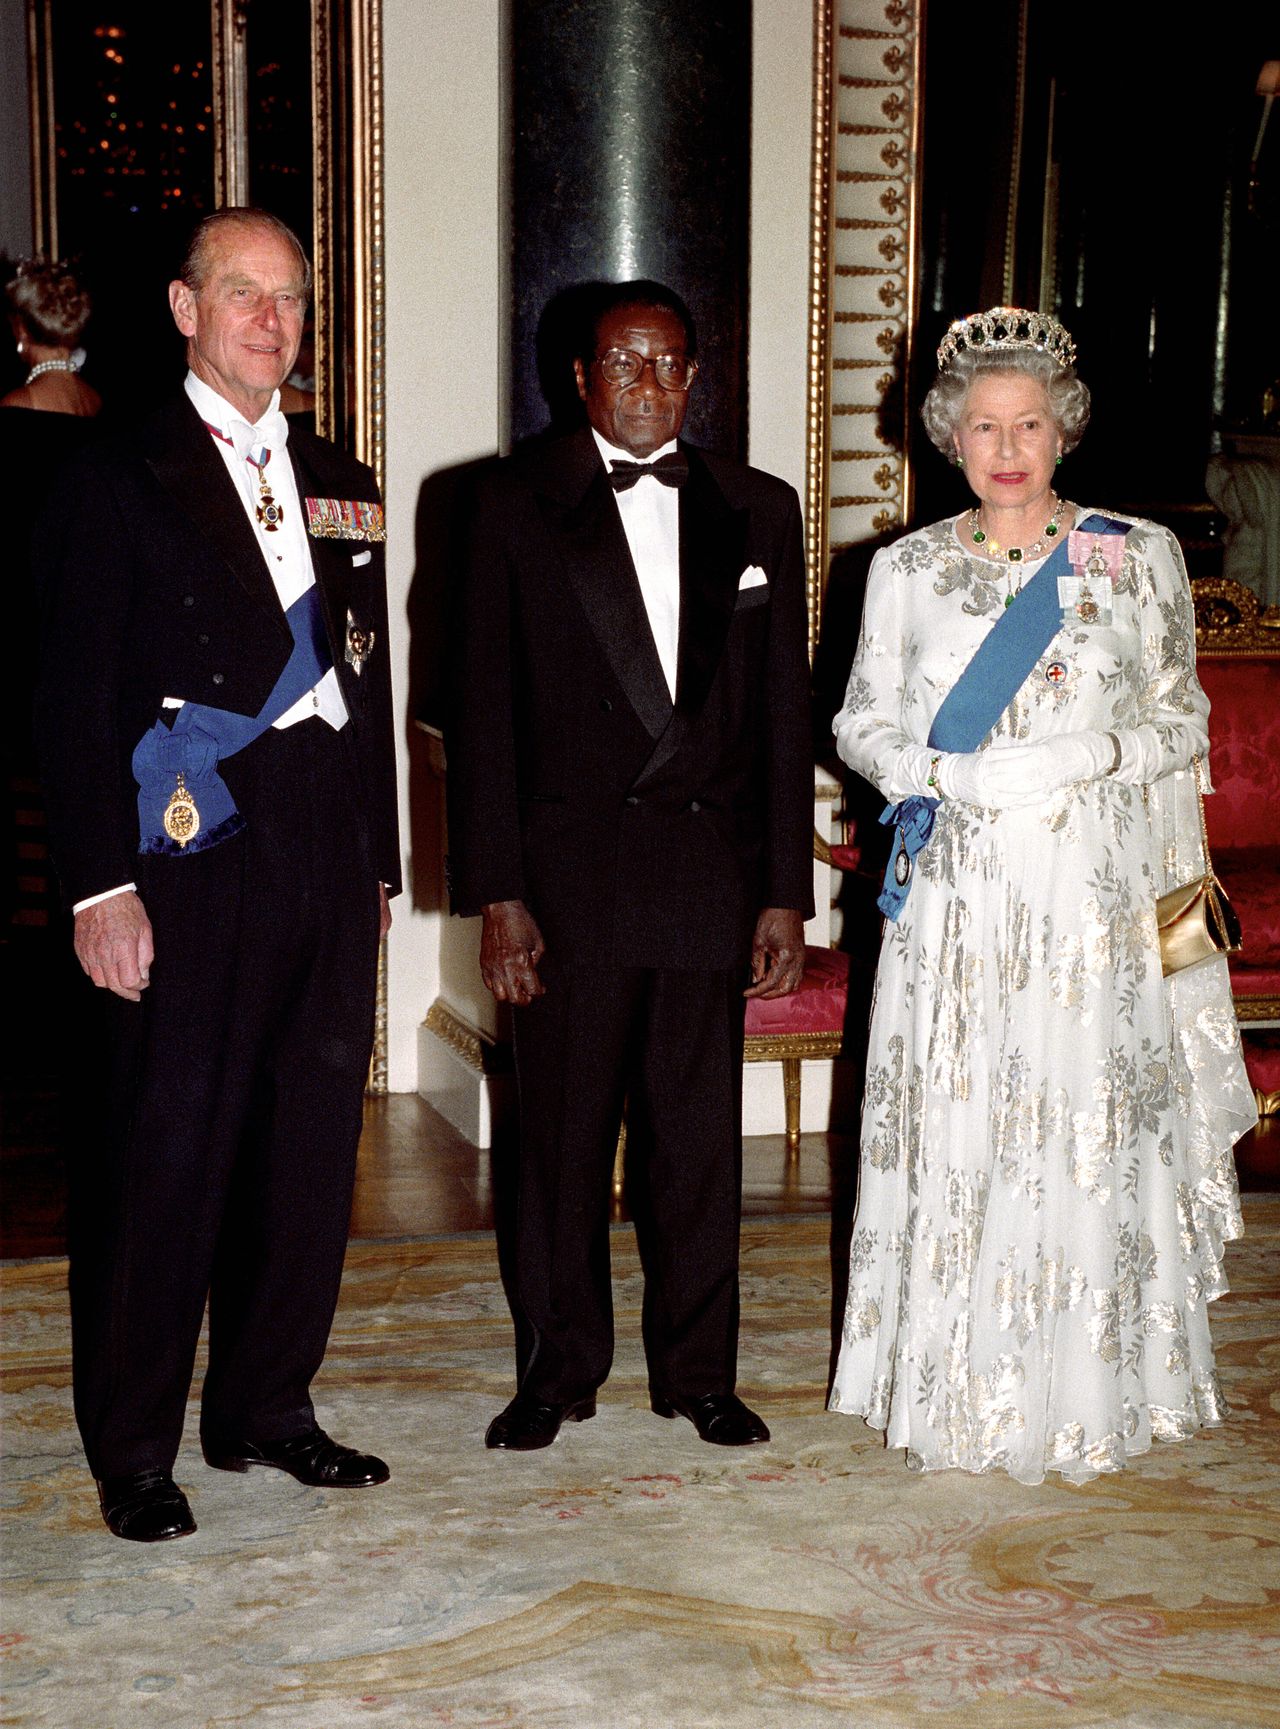 Prince Philip with Robert Mugabe and the Queen before a state banquet in 1994 